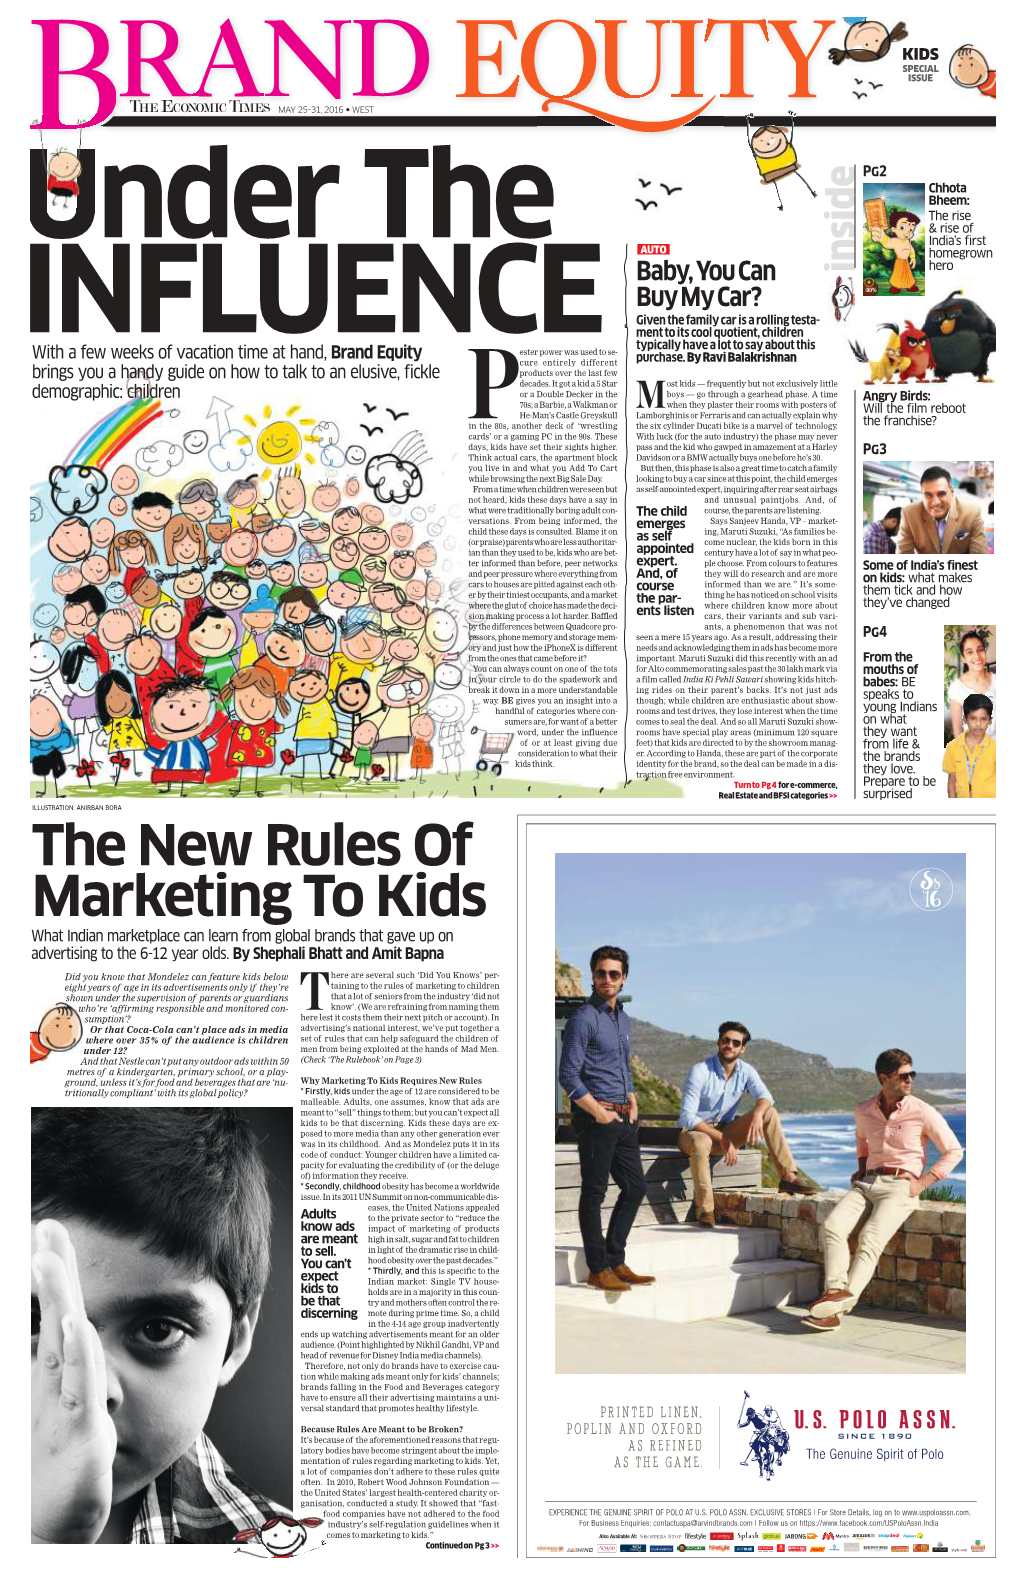 The New Rules of Marketing to Kids What Indian Marketplace Can Learn from Global Brands That Gave up on Advertising to the 6-12 Year Olds